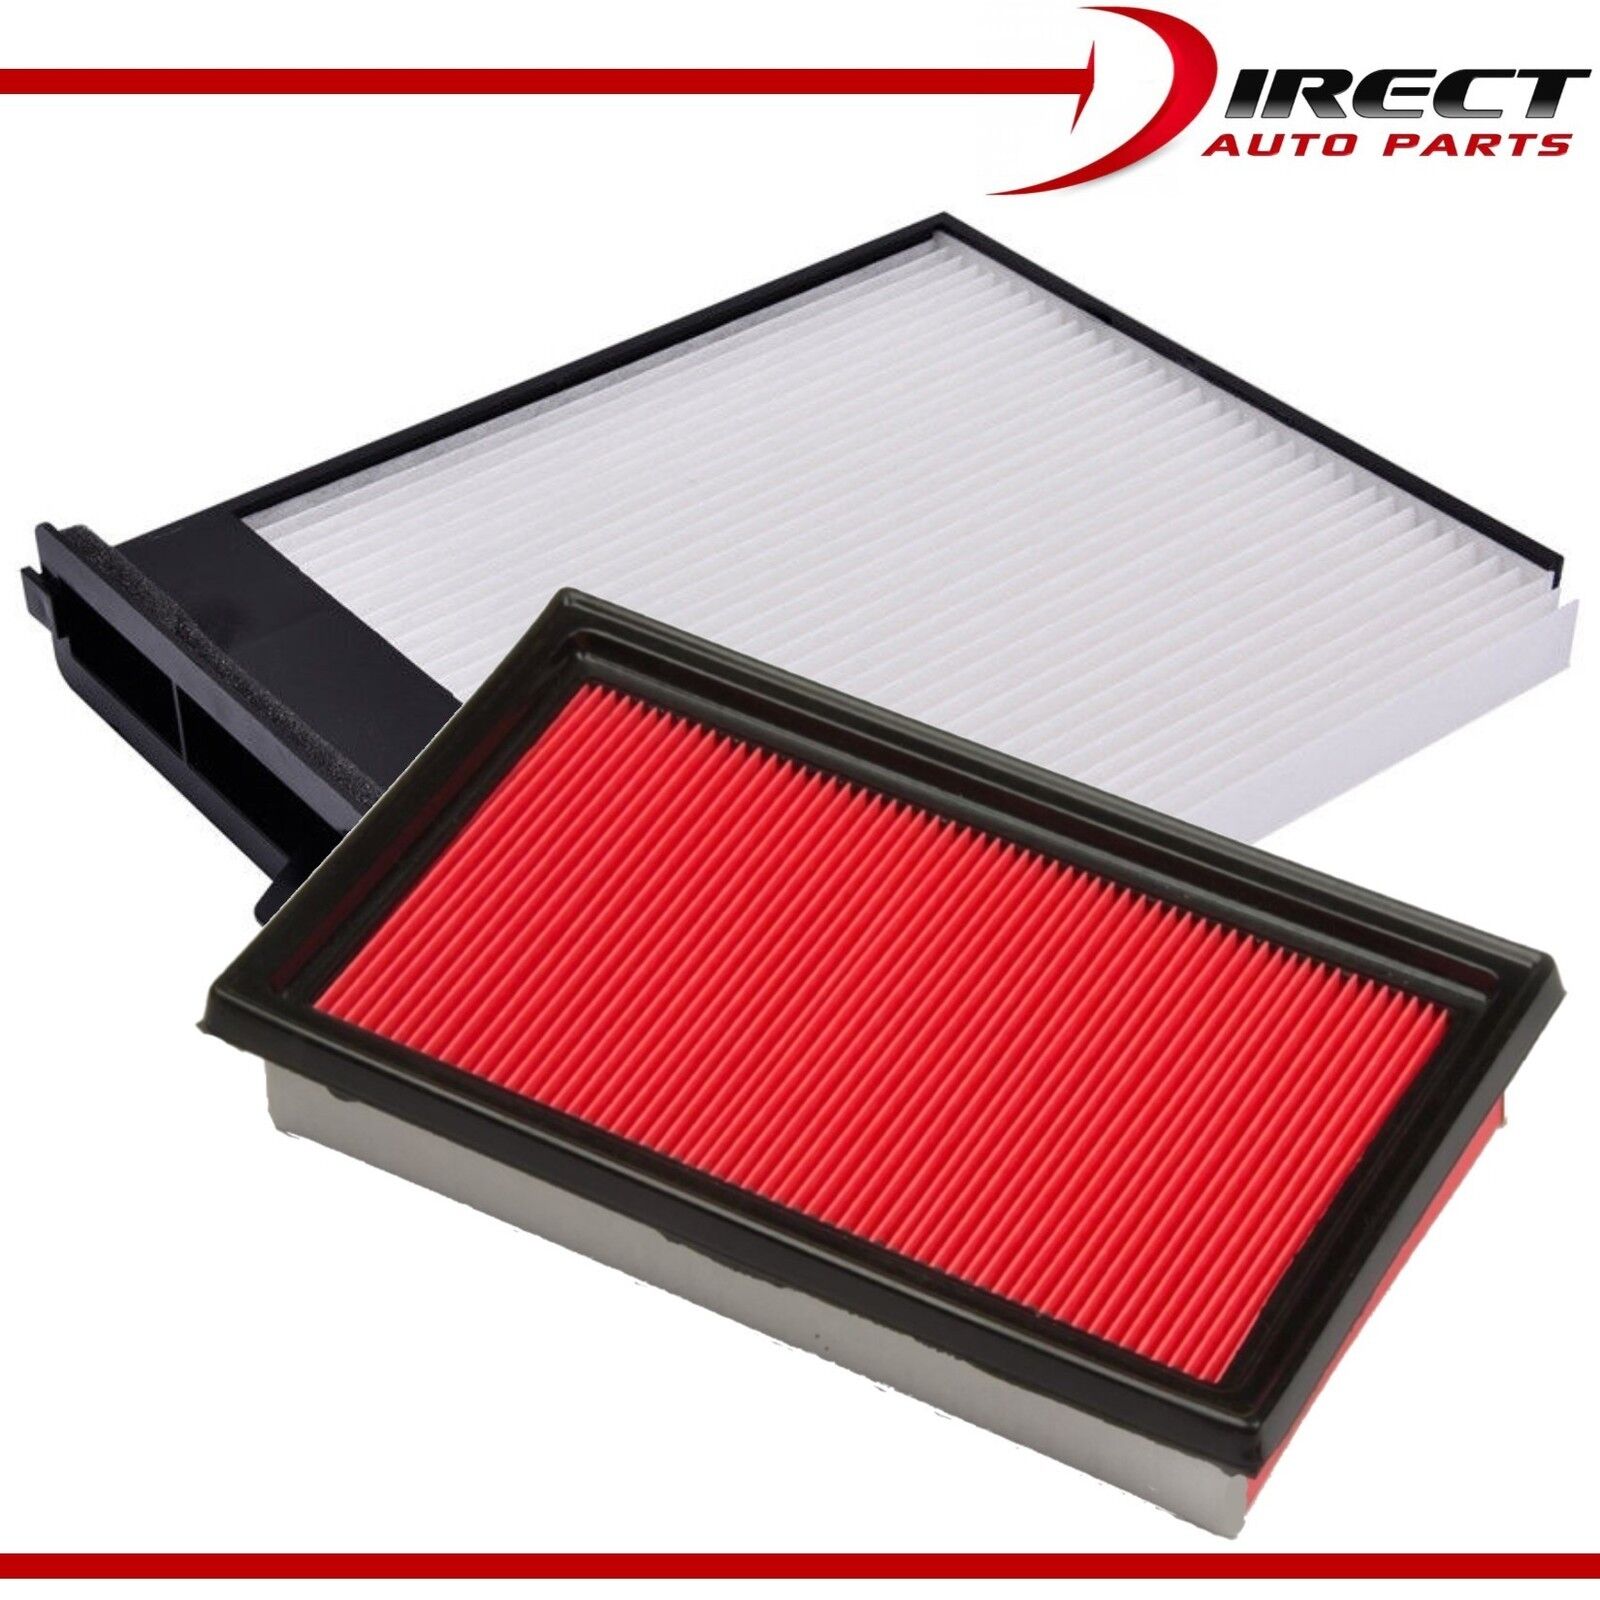 COMBO PREMIUM AIR FILTER & CABIN FILTER FOR NISSAN VERSA 1.8L ENGINE 2007-2012